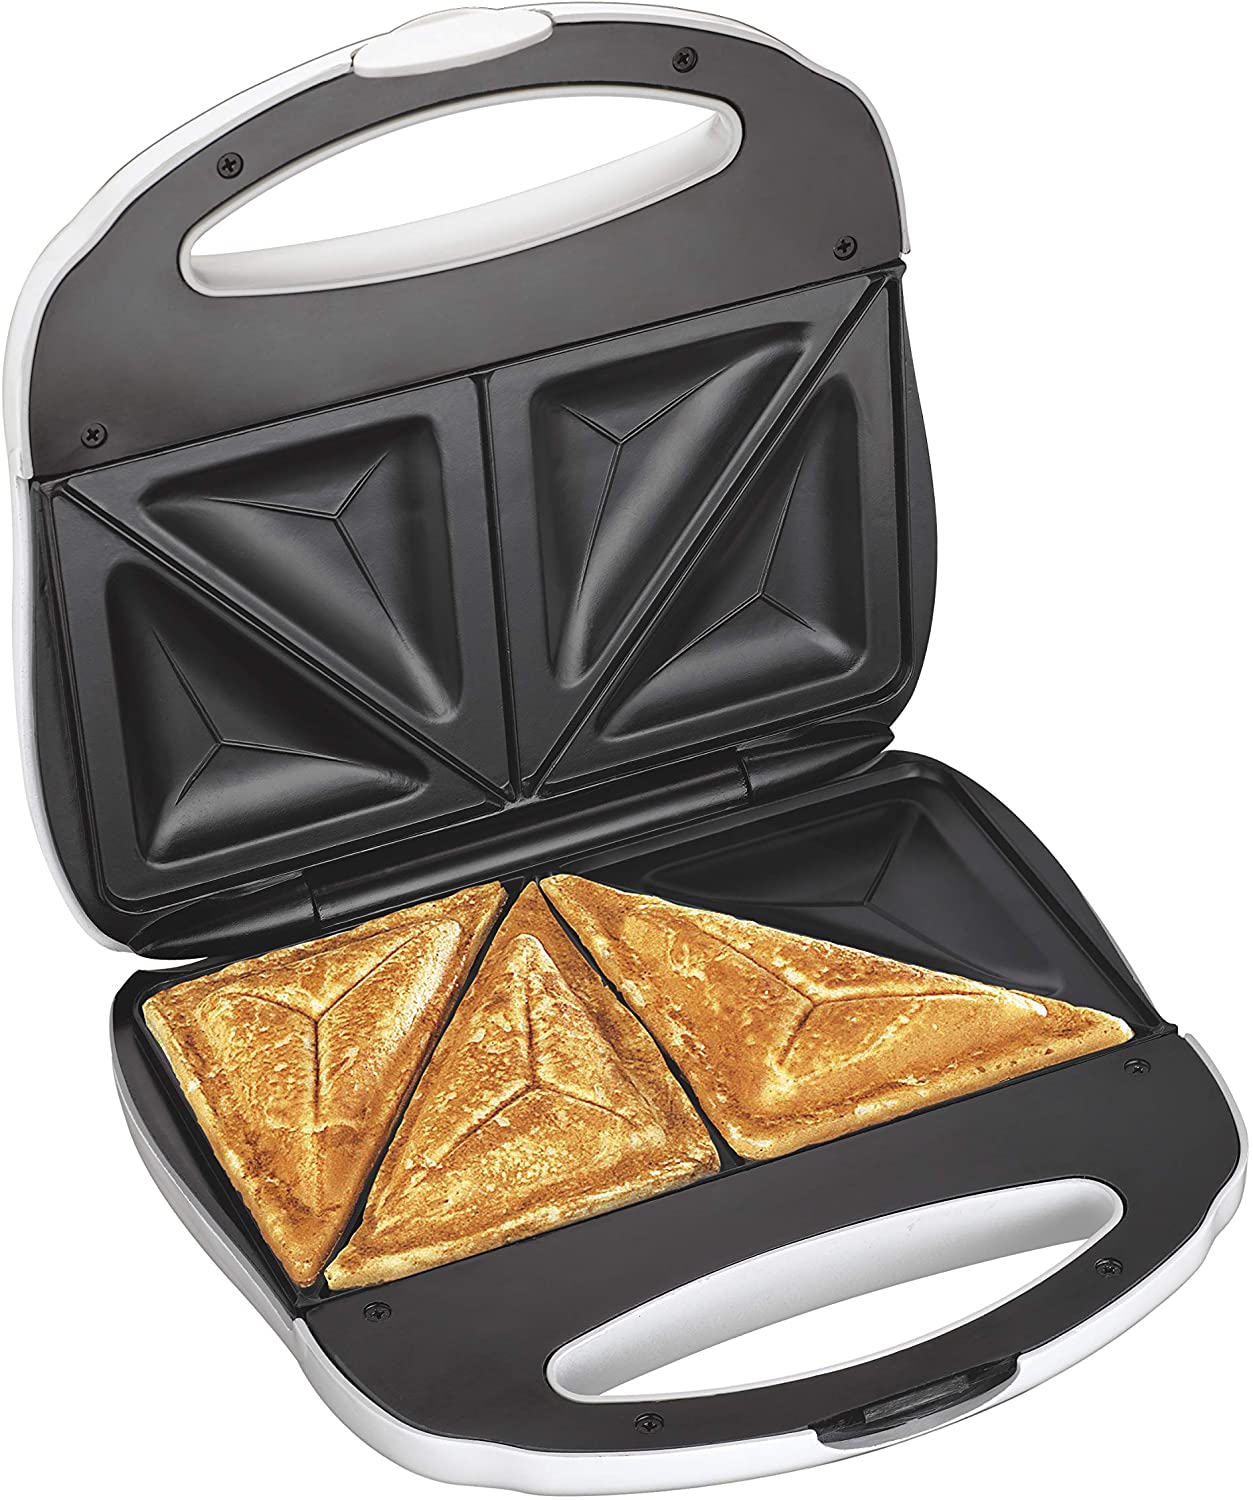 Proctor Silex Sandwich Toaster, Omelet And Turnover Maker, White (25408Y)